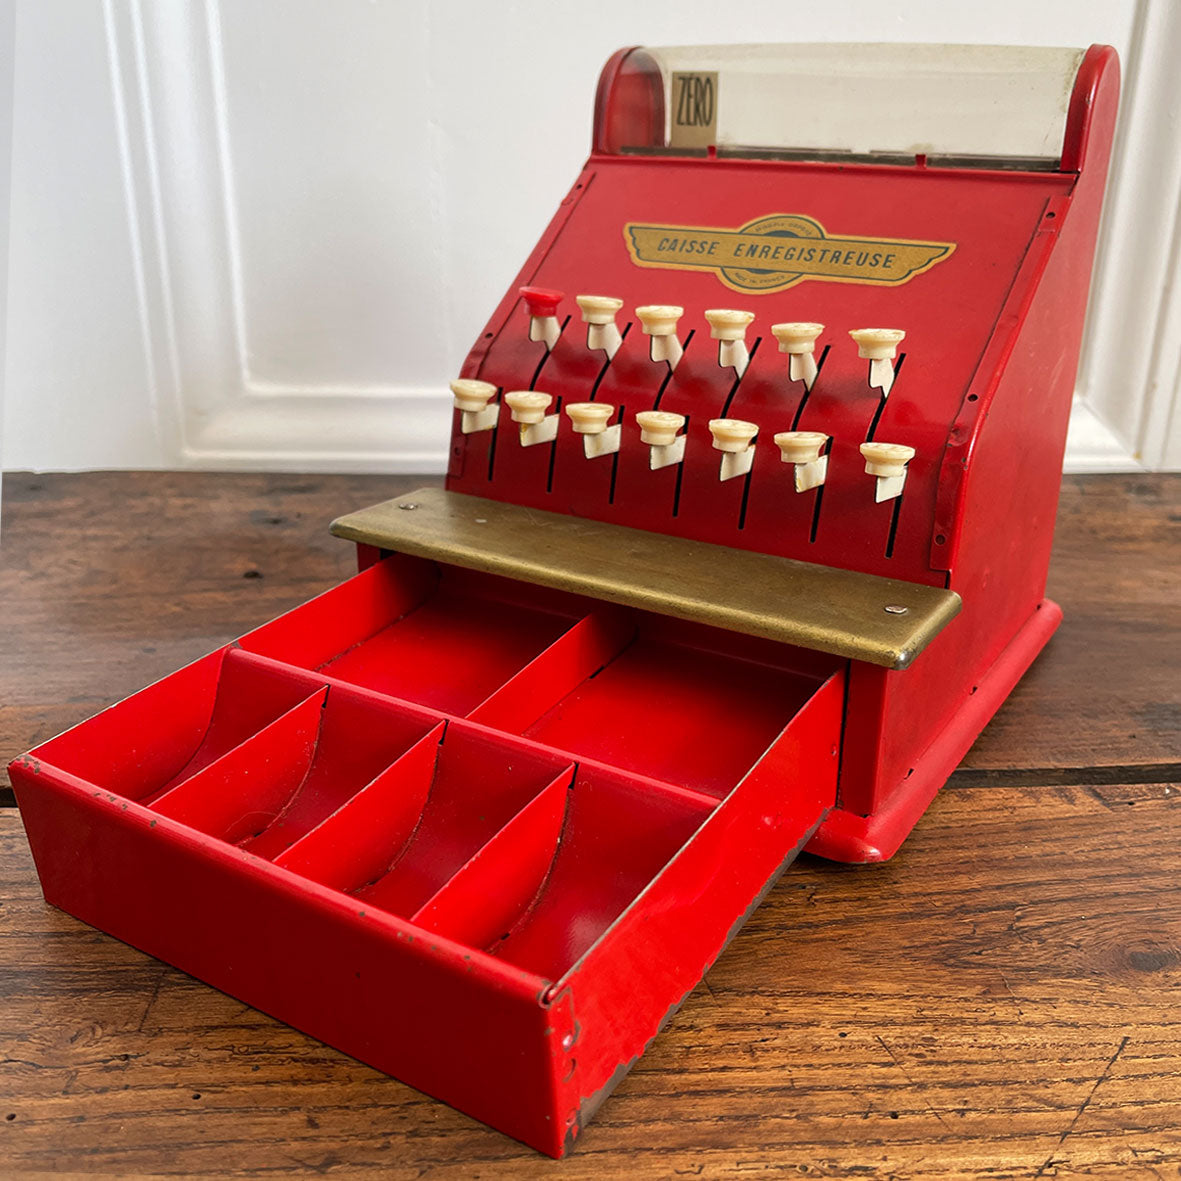 A Charming Children's French toy cash tin plate cash register. Finished in original red paintwork with white keys and a golden Caisse Enregistreuse waterslide decal. - SHOP NOW - www.intovintage.co.uk